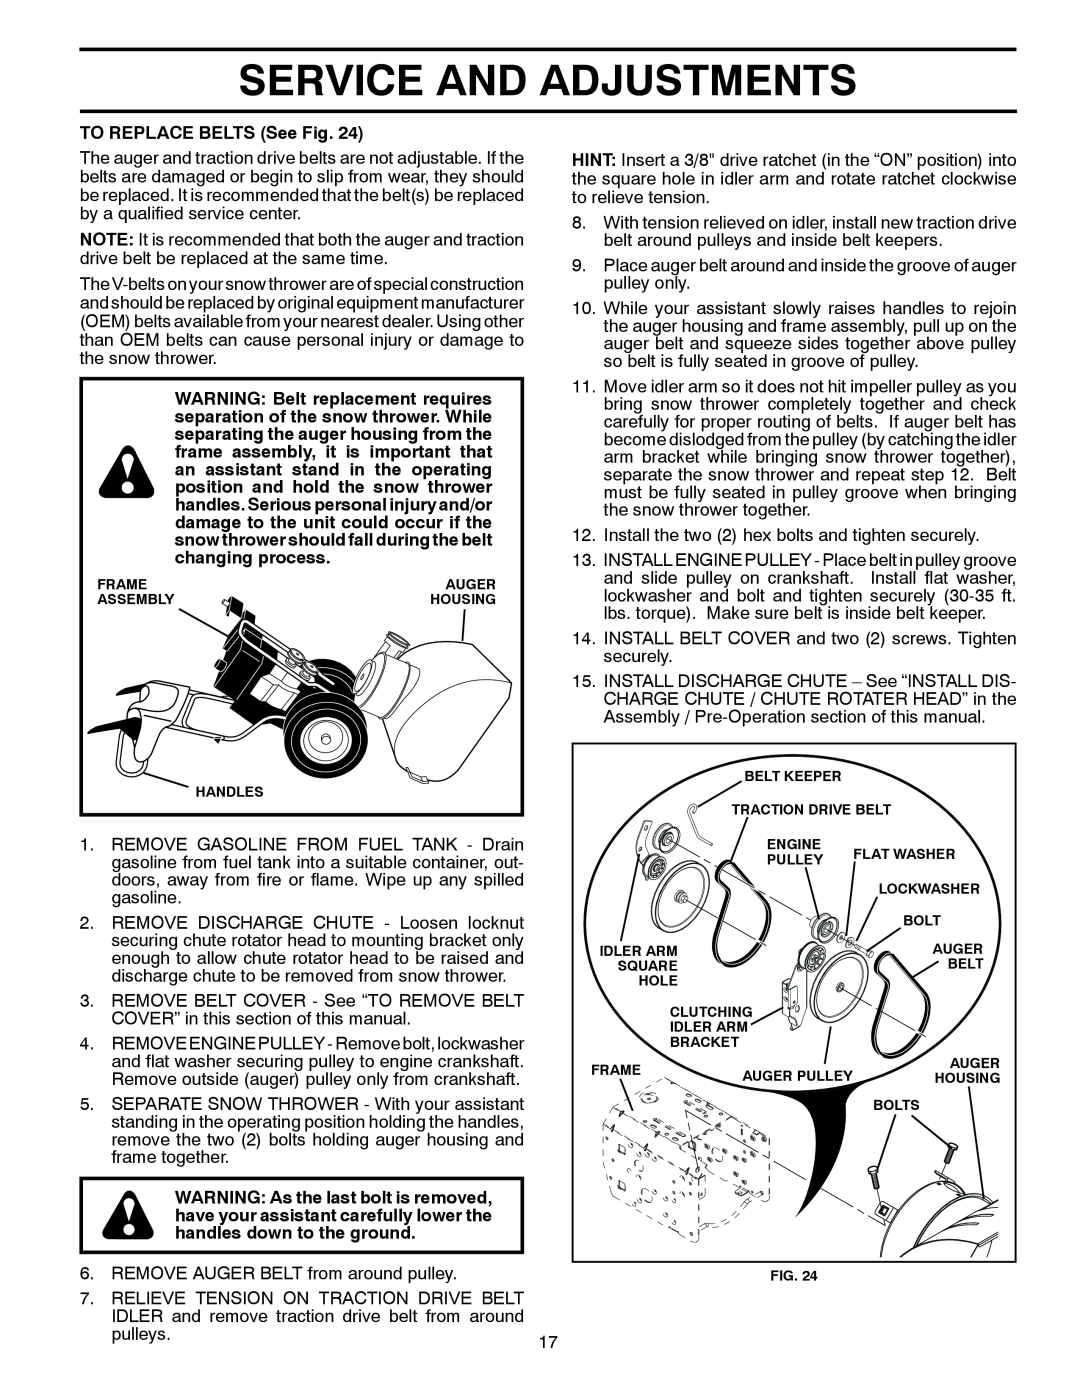 Husqvarna 1130SB-LSB owner manual Service And Adjustments, TO REPLACE BELTS See Fig 